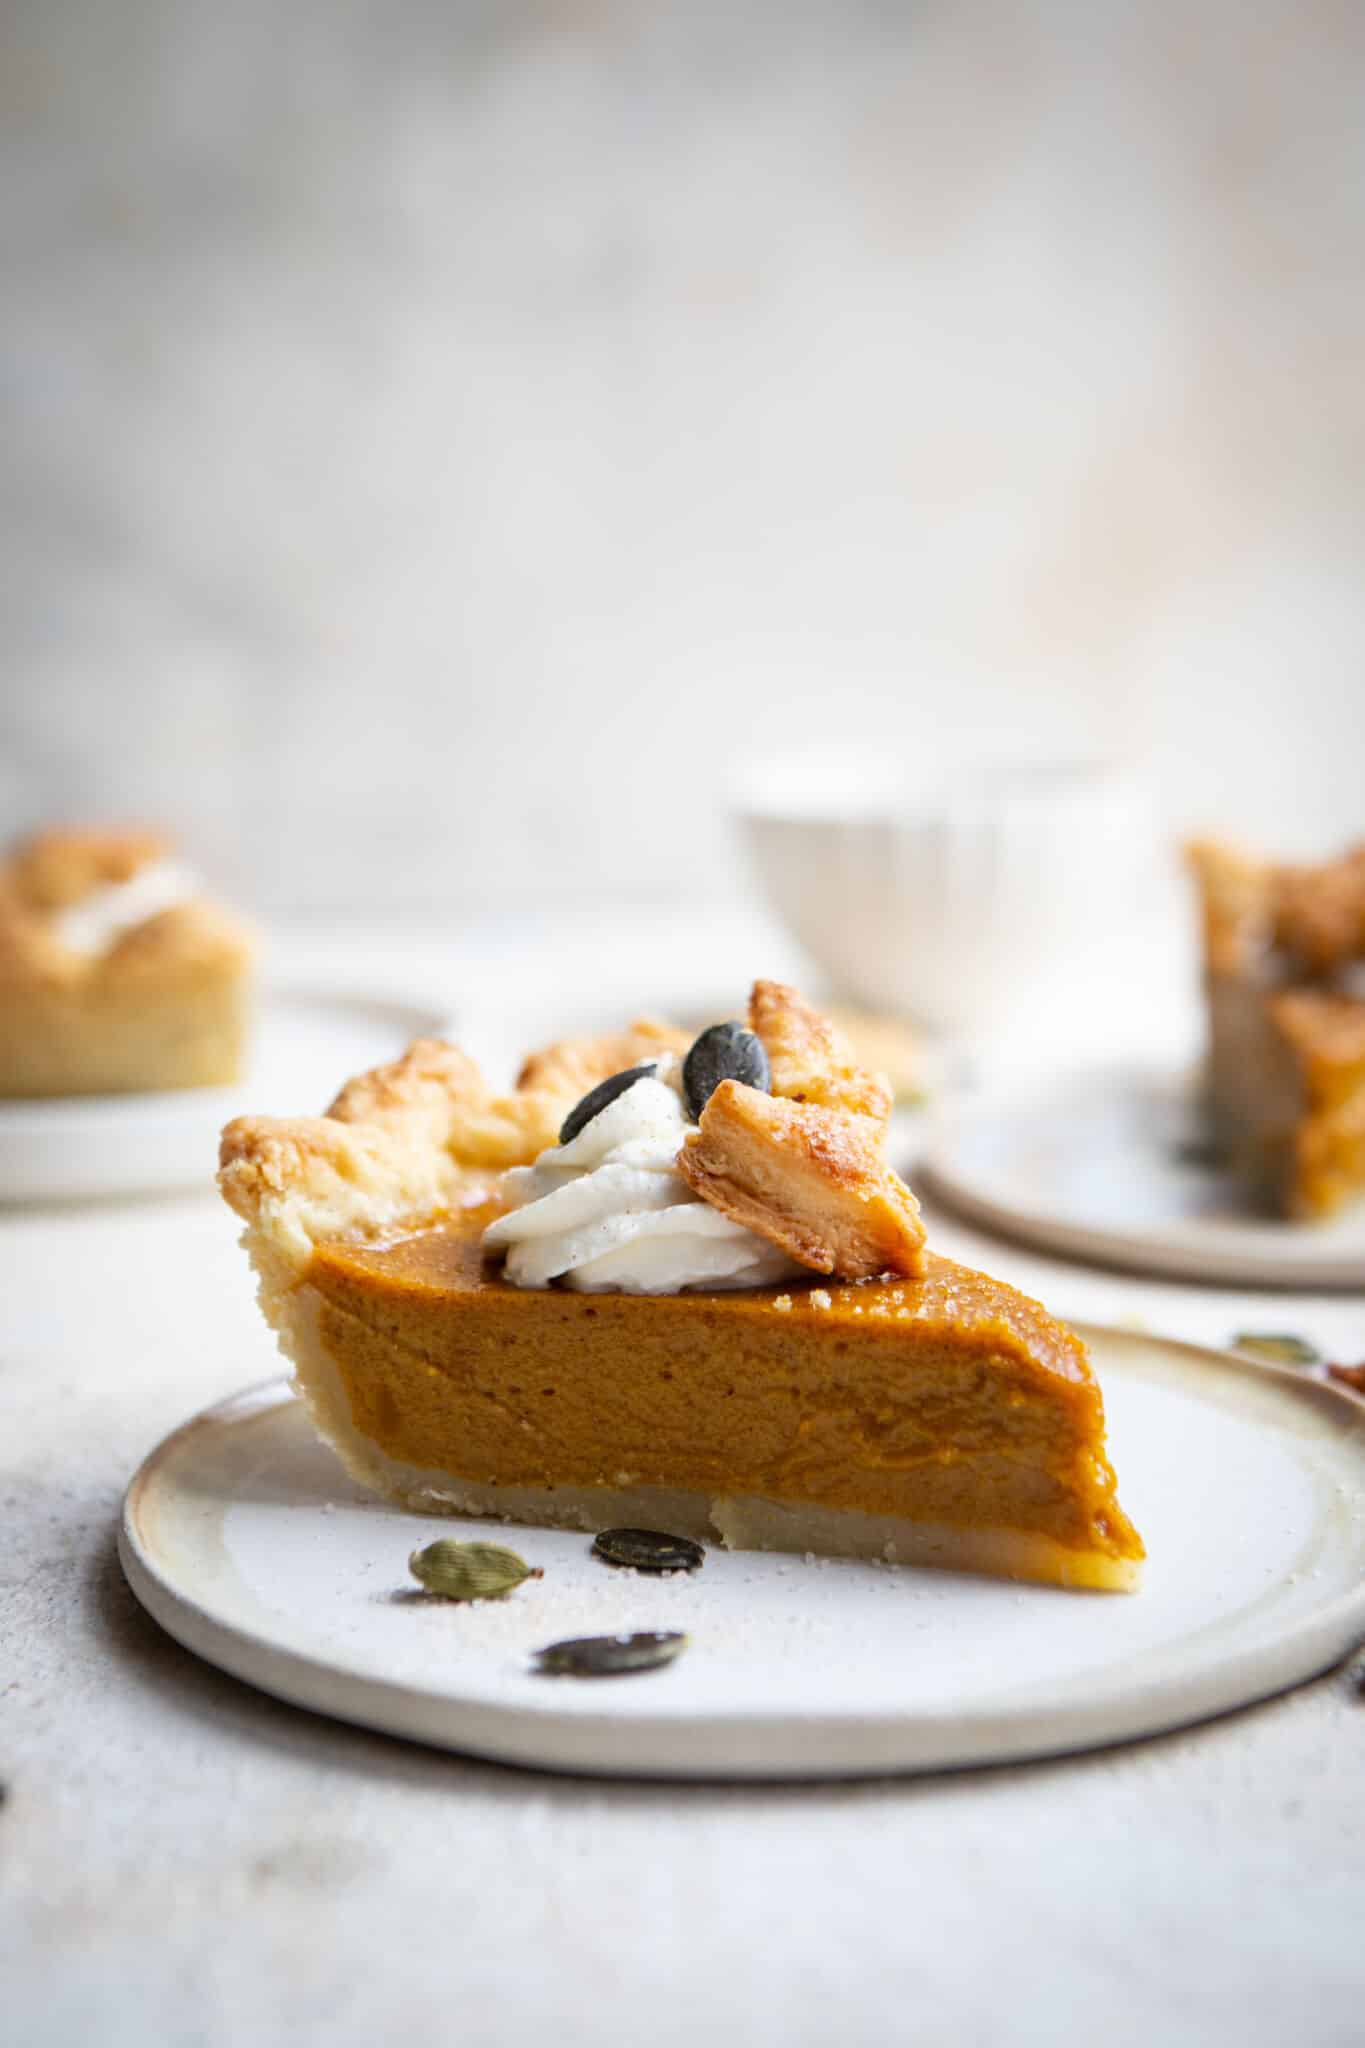 A slice of chai pumpkin pie with whipped cream and pumpkin seed garnish on a white plate.